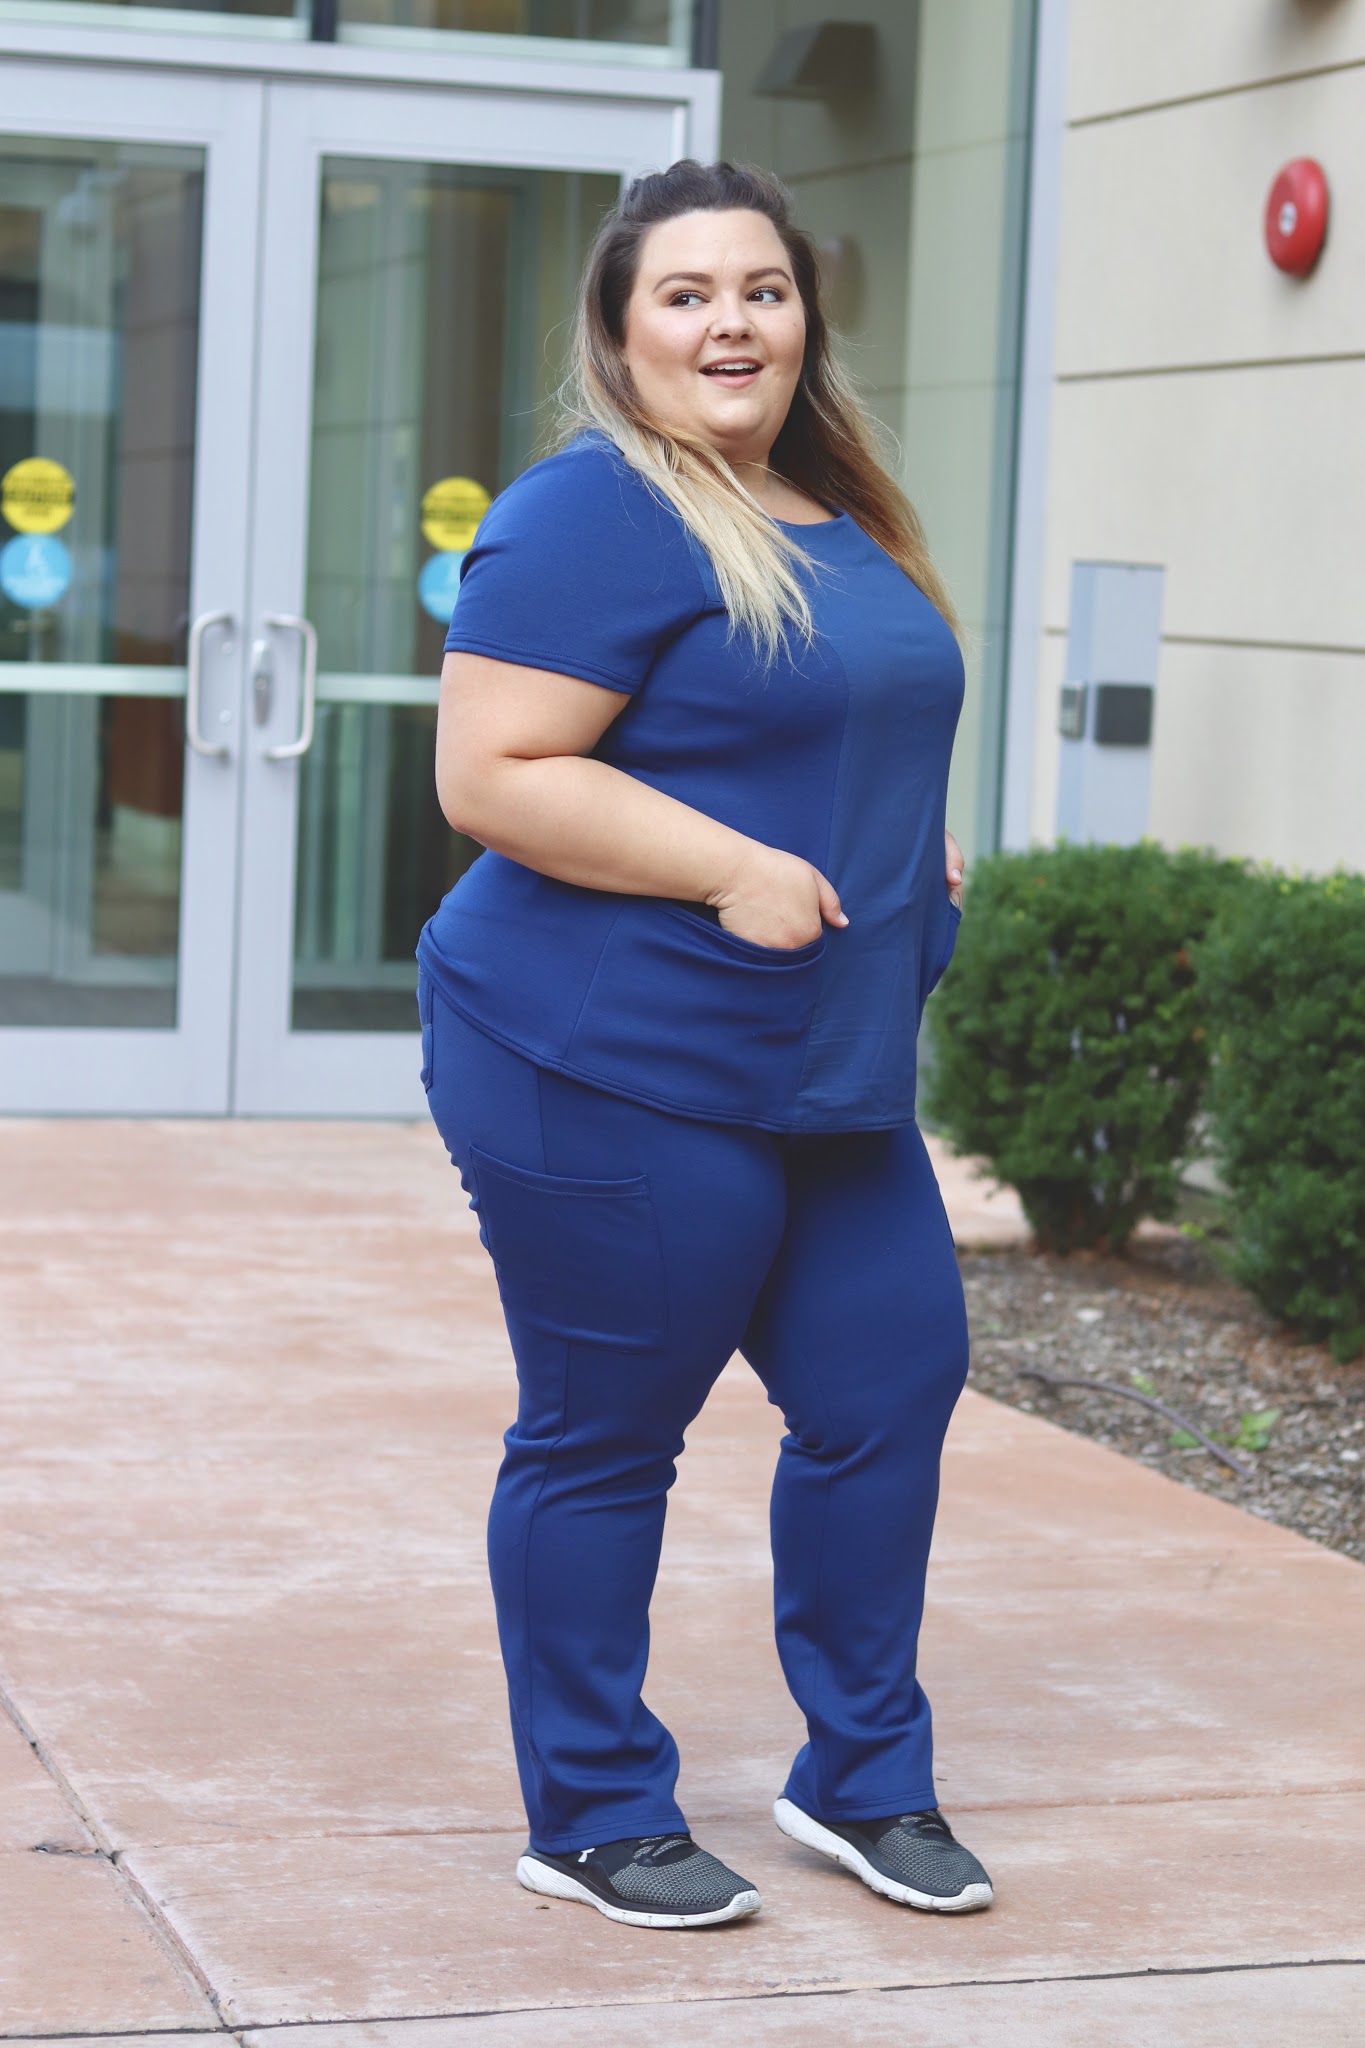 plus size scrubs, plus size medical apparel, affordable plus size clothing, natalie in the city, natalie craig, plus size fashion, Chicago plus size fashion blogger